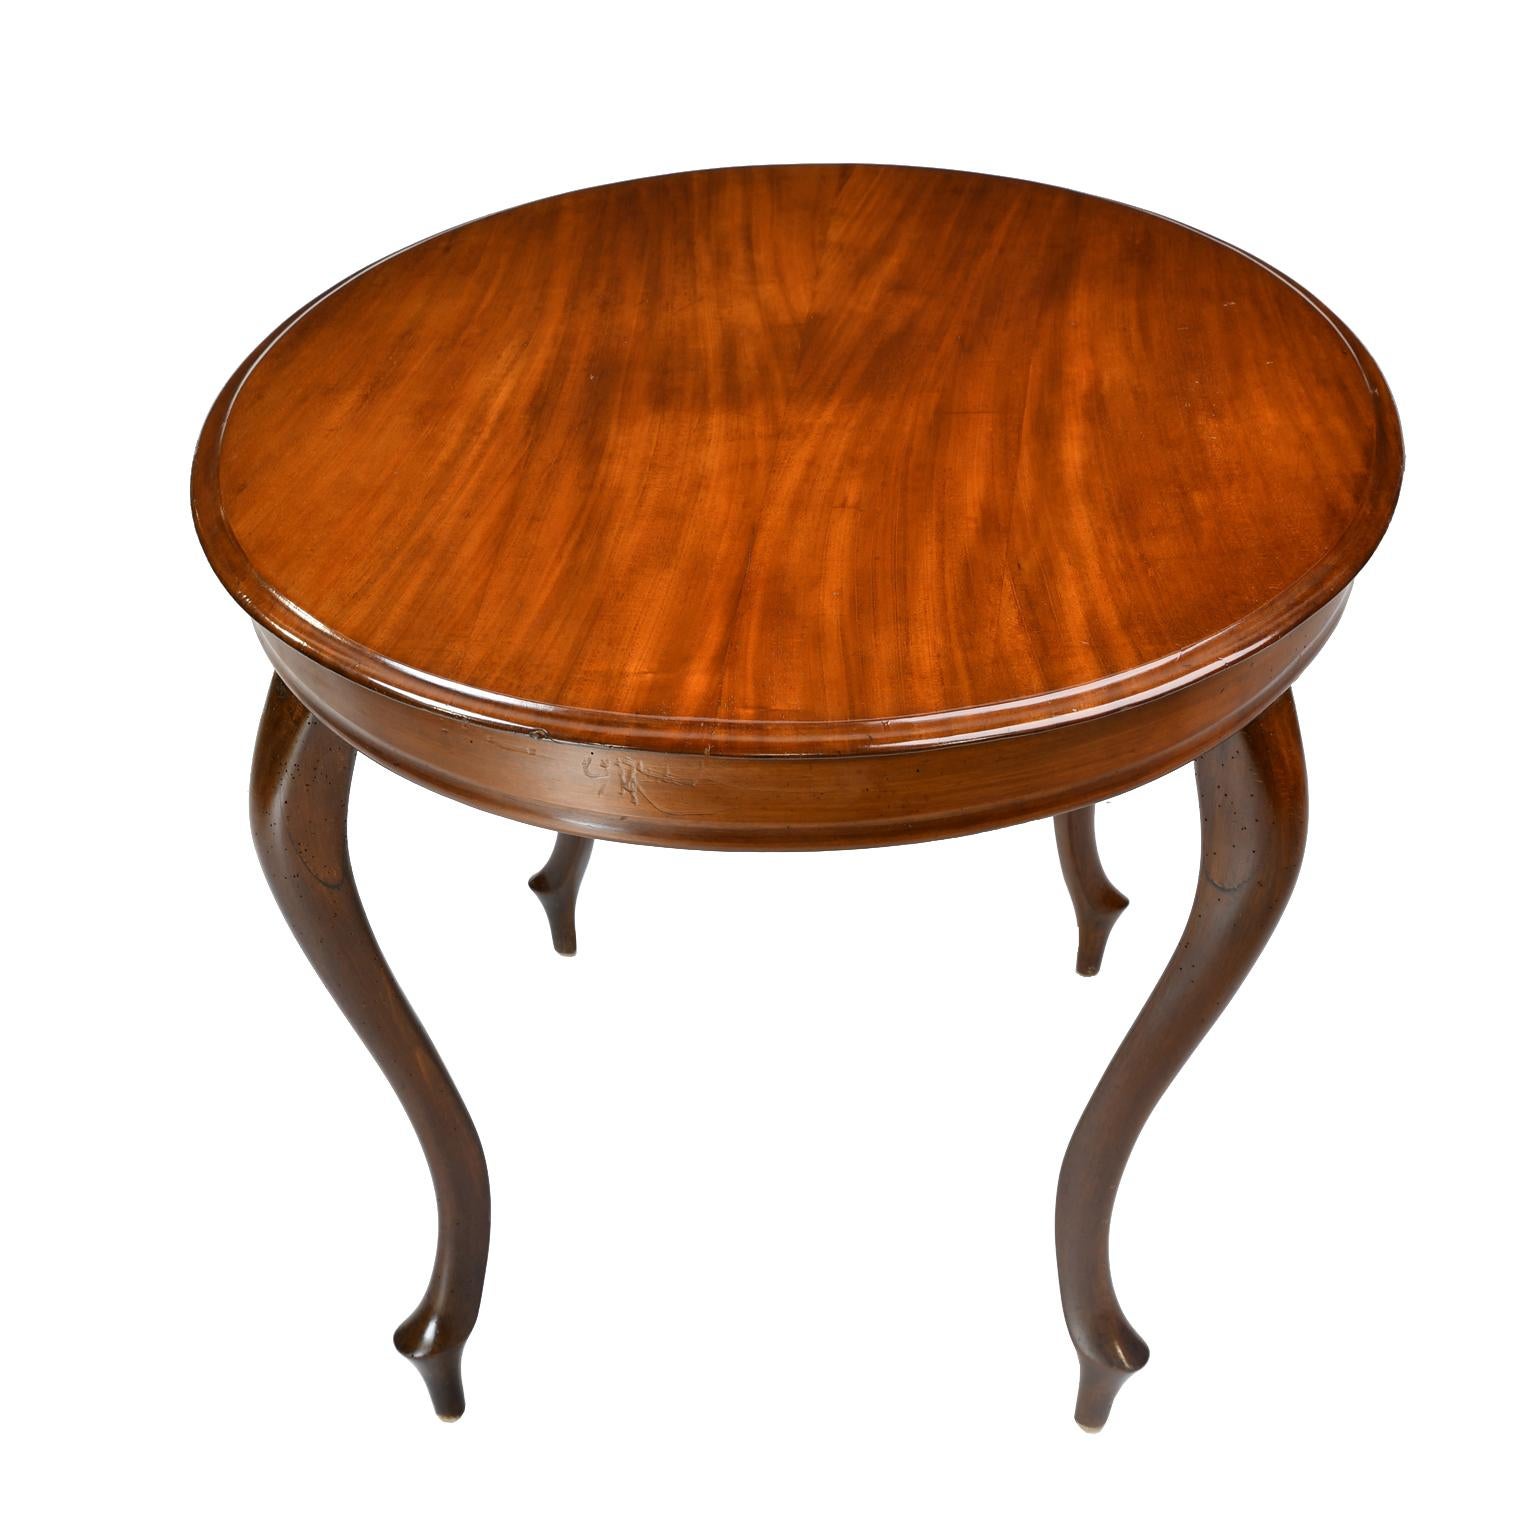 Antique Louis Philippe Style Mahogany Oval Dining/ Center Table, Denmark, c 1860 For Sale 2